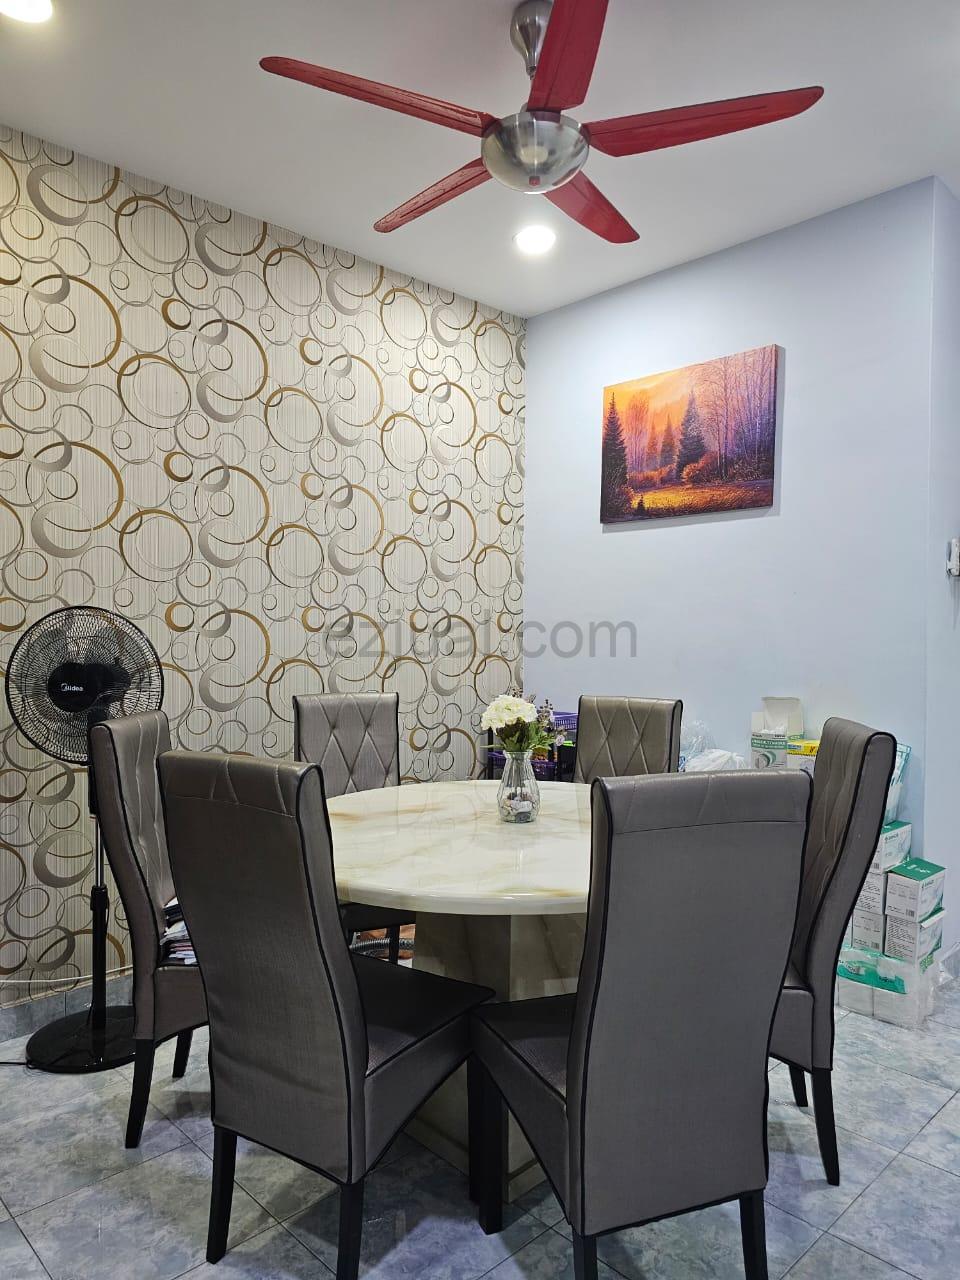 Setia Indah 6 Single Storey Renovated House For Sale(Facing South)